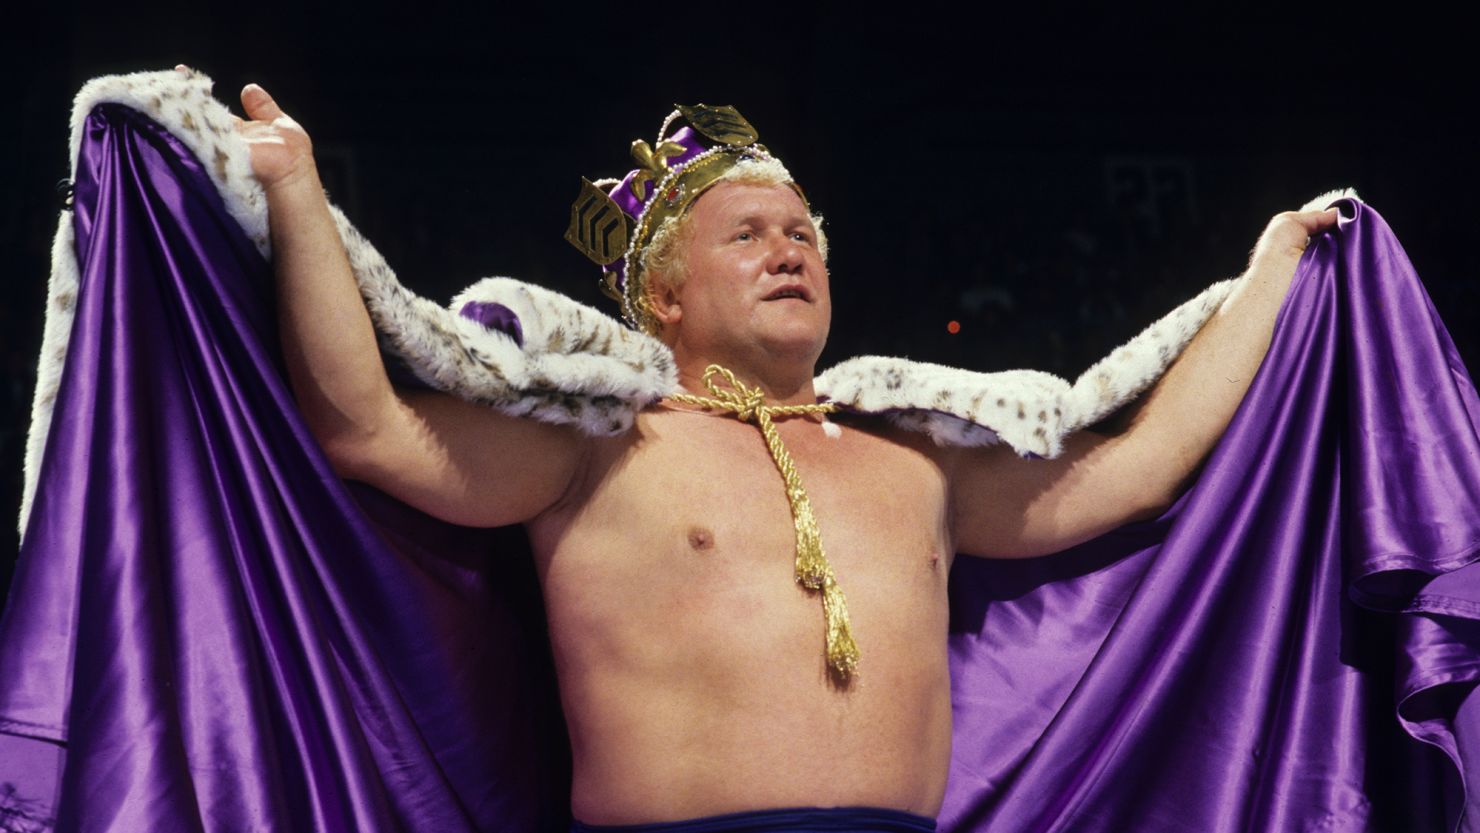 "The King" Harley Race dons a robe and crown in the ring.